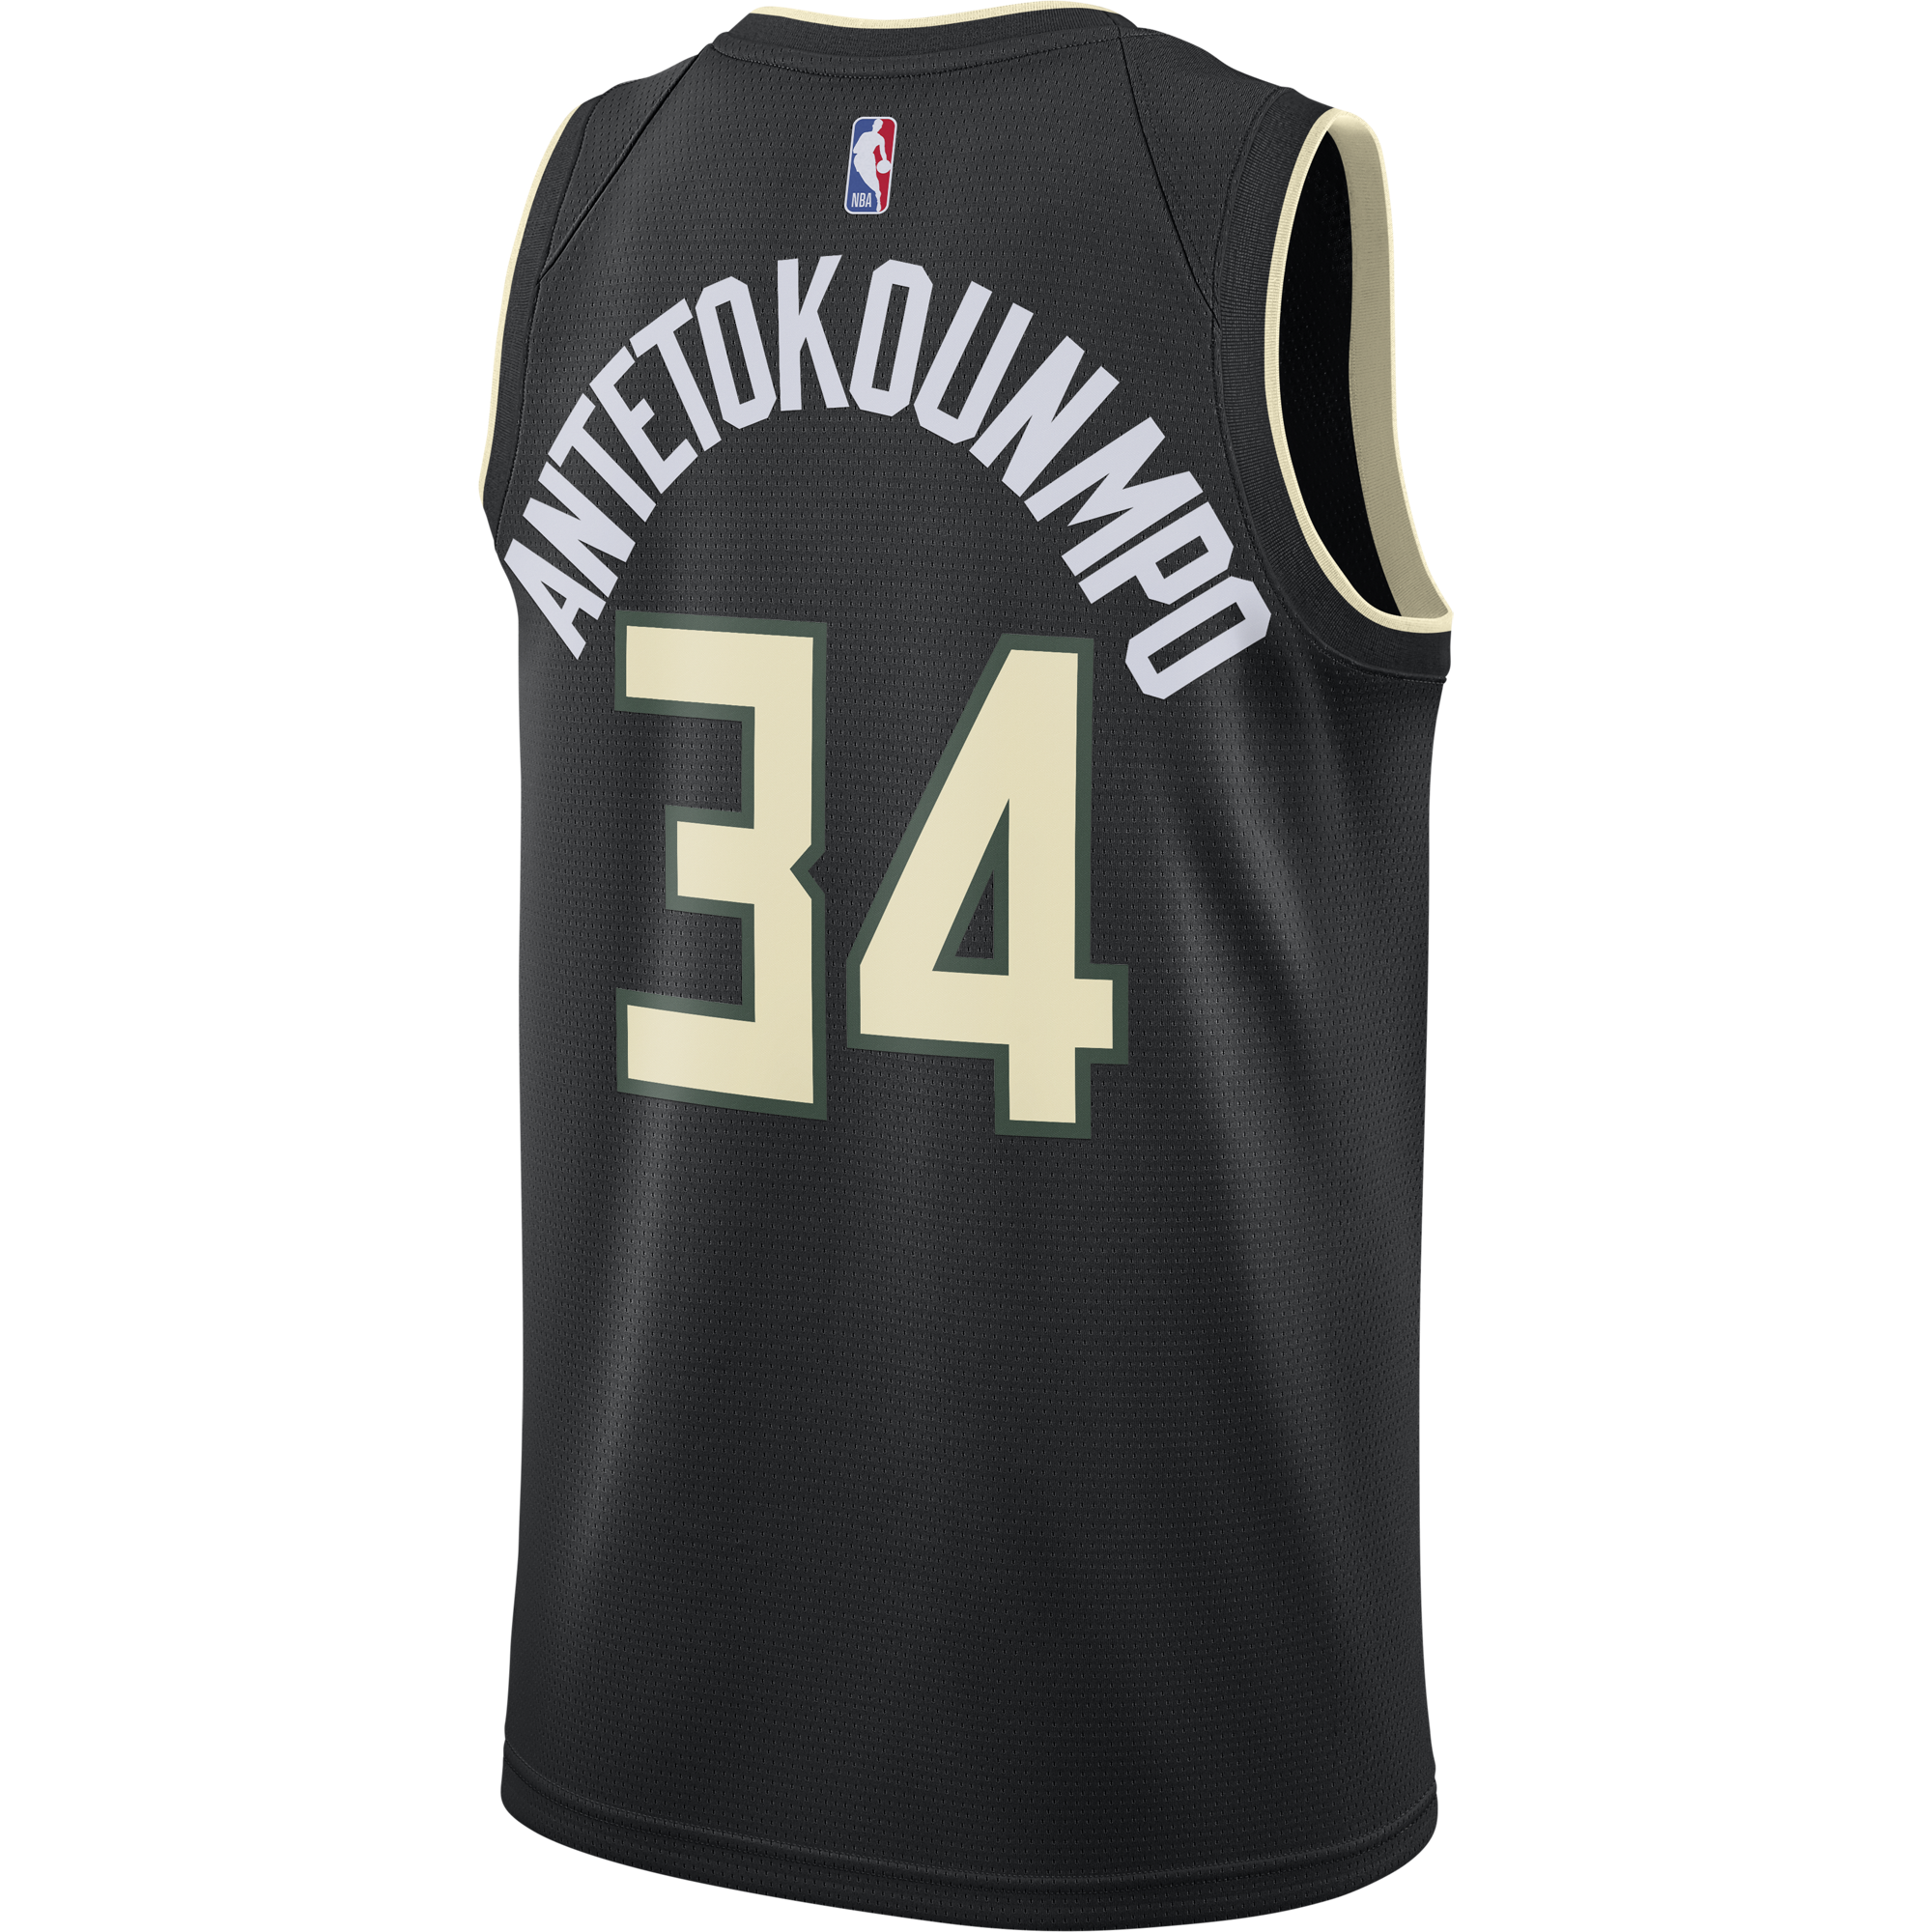 giannis antetokounmpo jersey for sale